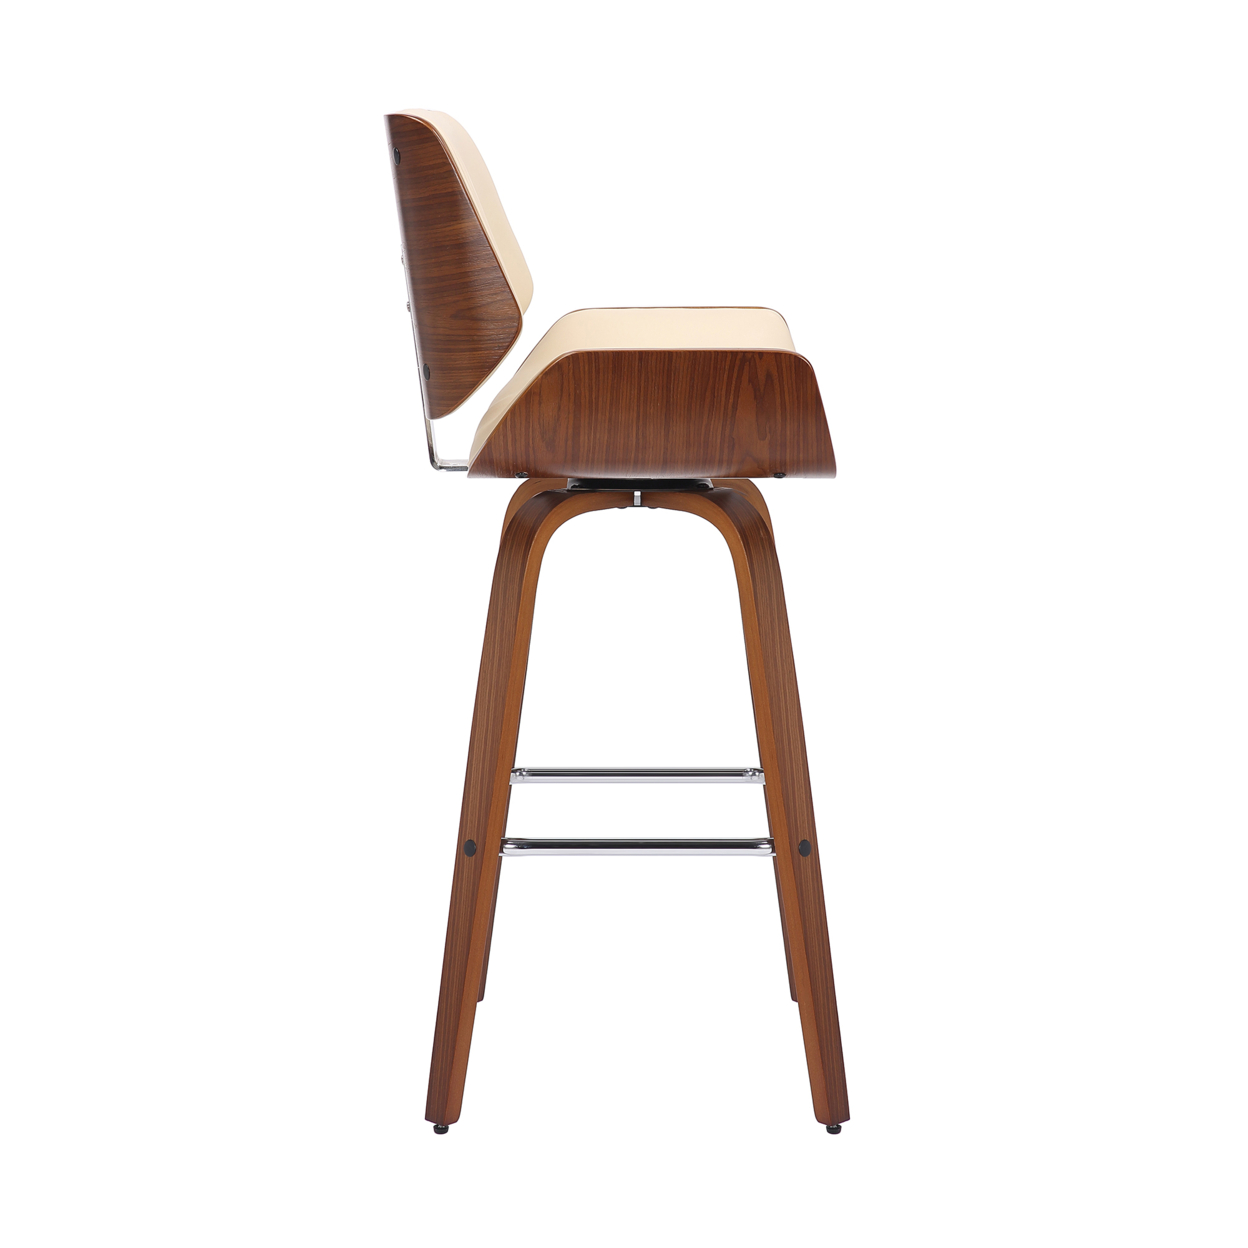 30 Inch Bar Stool With Curved Padded Back And Seat, Brown- Saltoro Sherpi